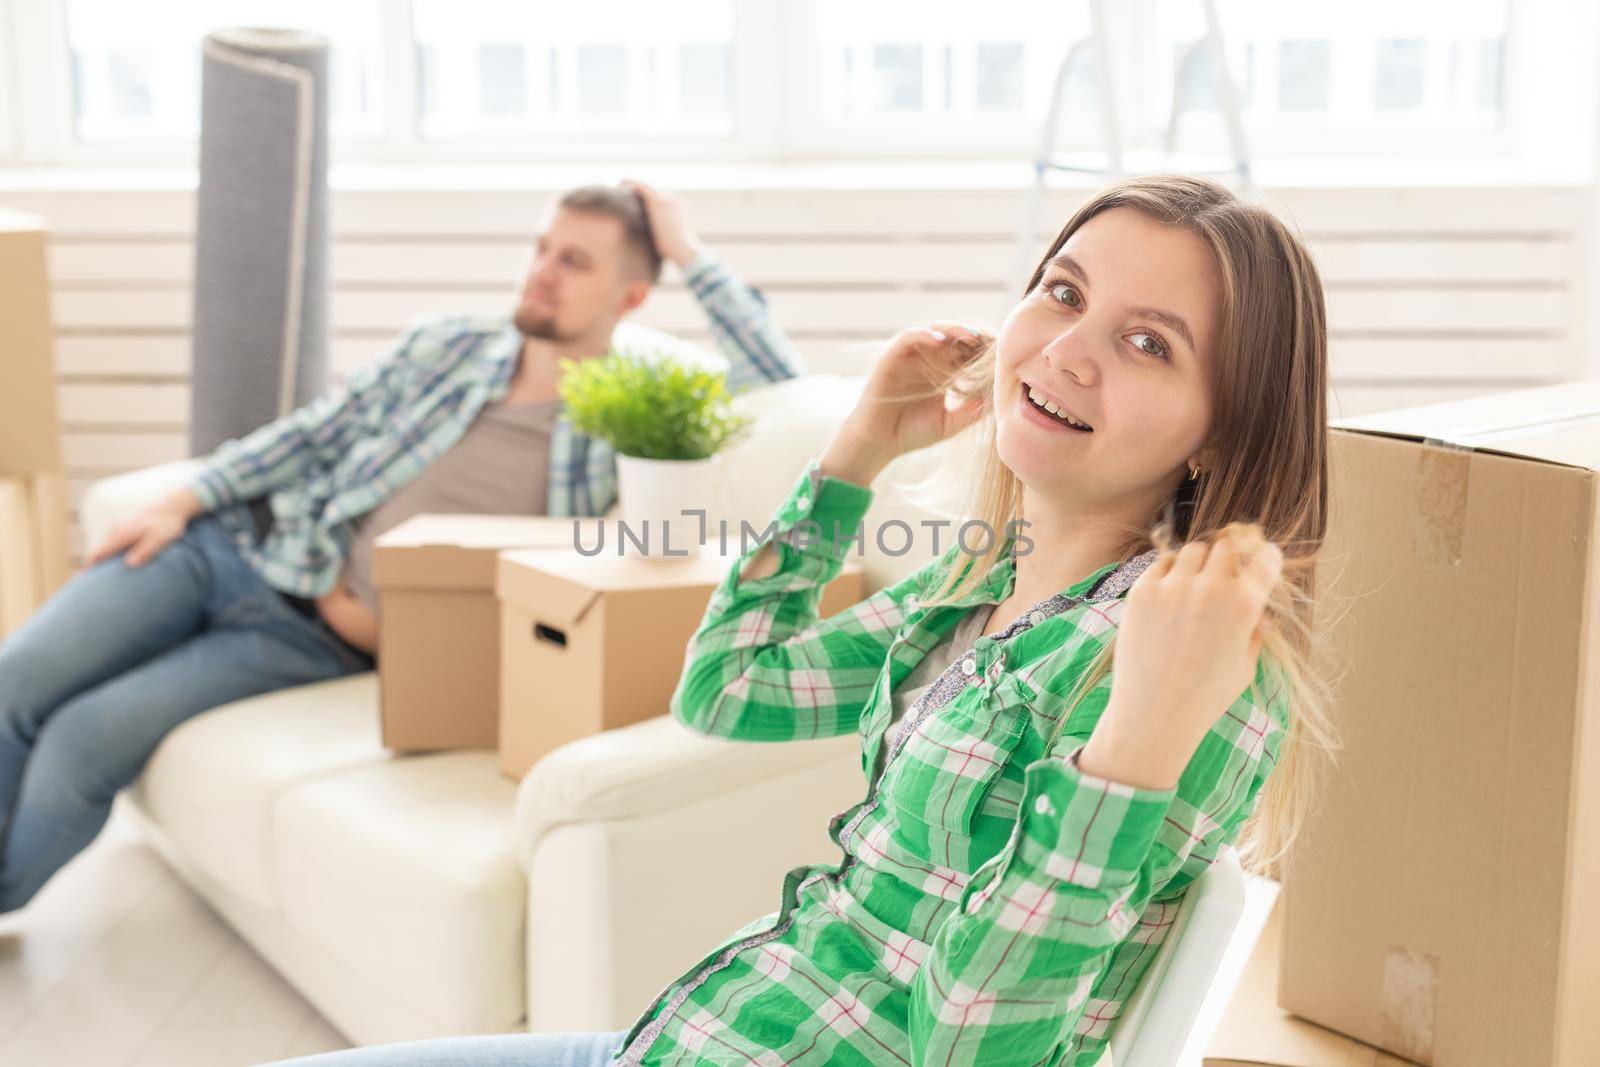 Positive smiling young girl sitting against her laughing blurred husband in a new living room while moving to a new home. The concept of joy from the possibility of finding new housing. by Satura86